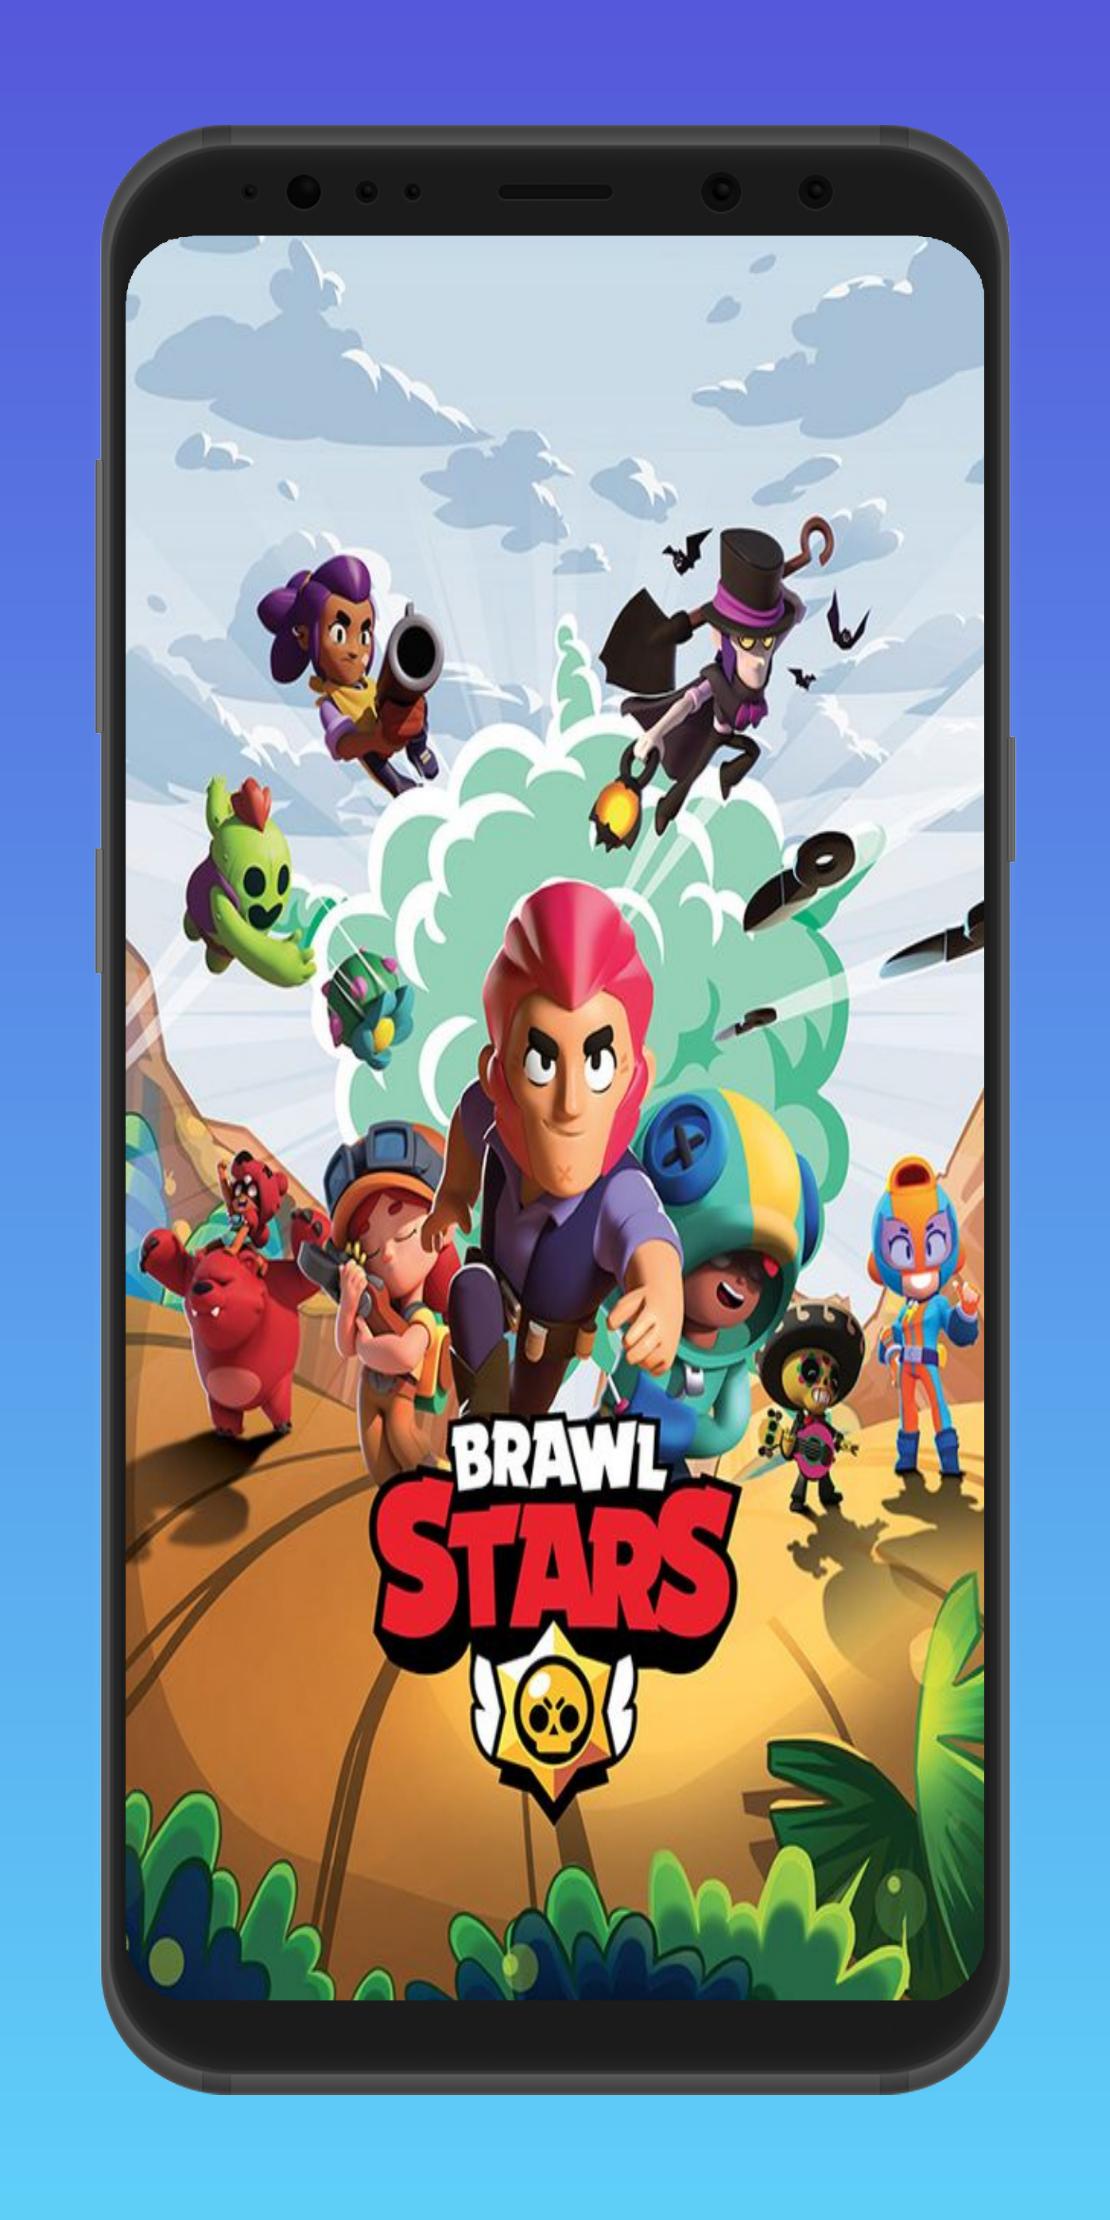 4k Brawl Stars Wallpapers 2021 Hd Bs Wallpaper For Android Apk Download - wallpapers de brawl stars 2021